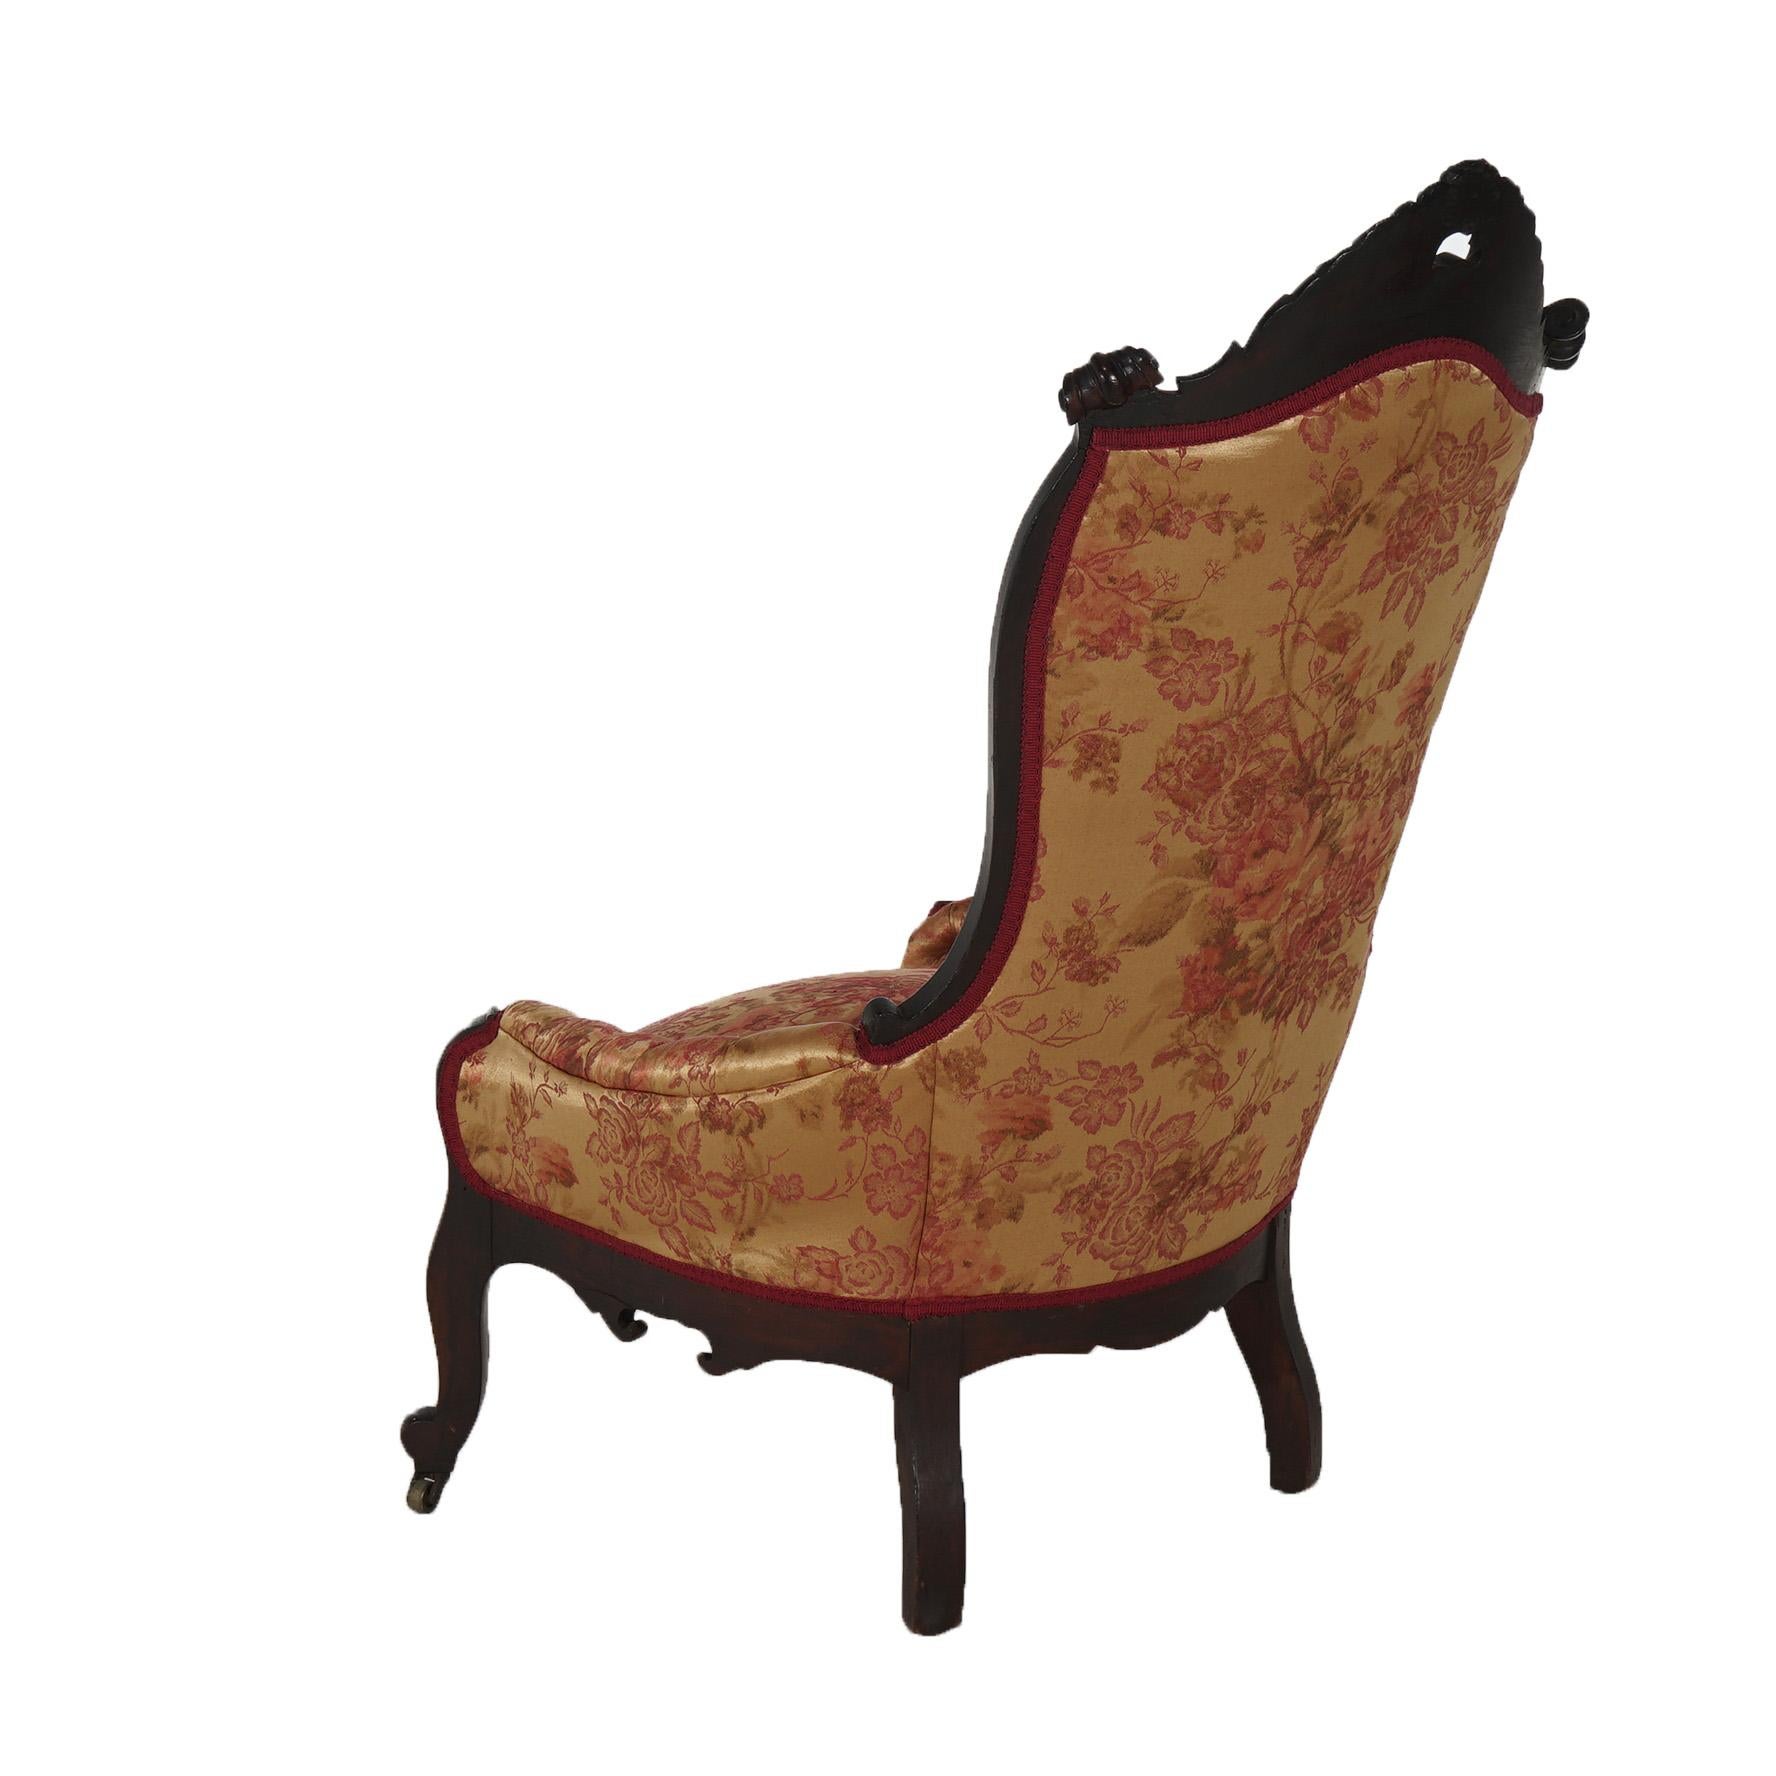 Antique Victorian Carved Walnut & Upholstered Lady’s Boudoir Chair C1890 For Sale 3